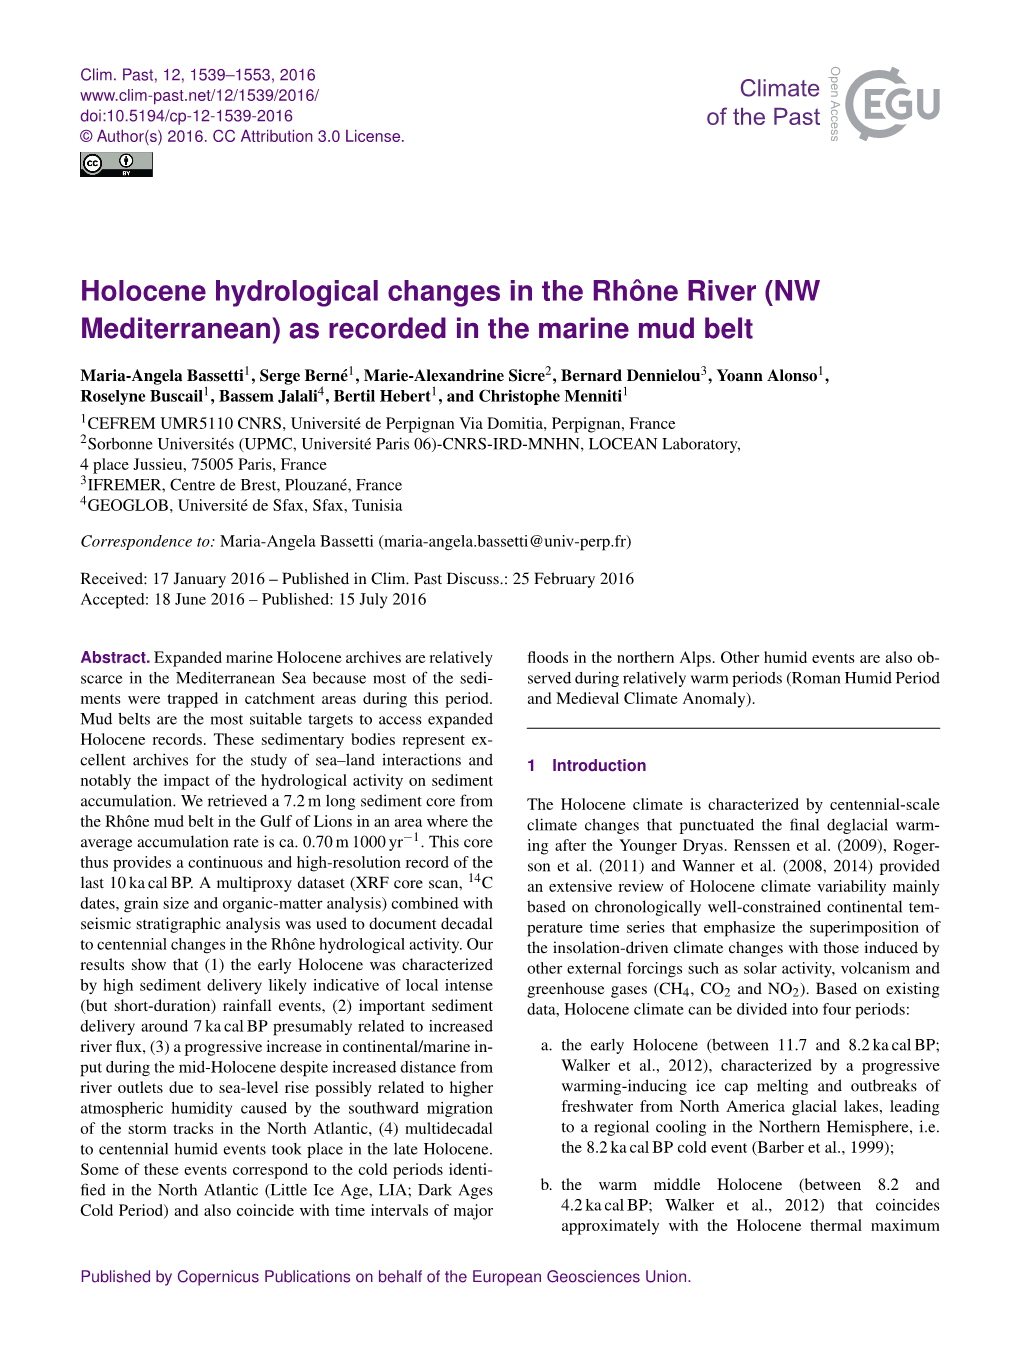 Holocene Hydrological Changes in the Rhône River (NW Mediterranean) As Recorded in the Marine Mud Belt